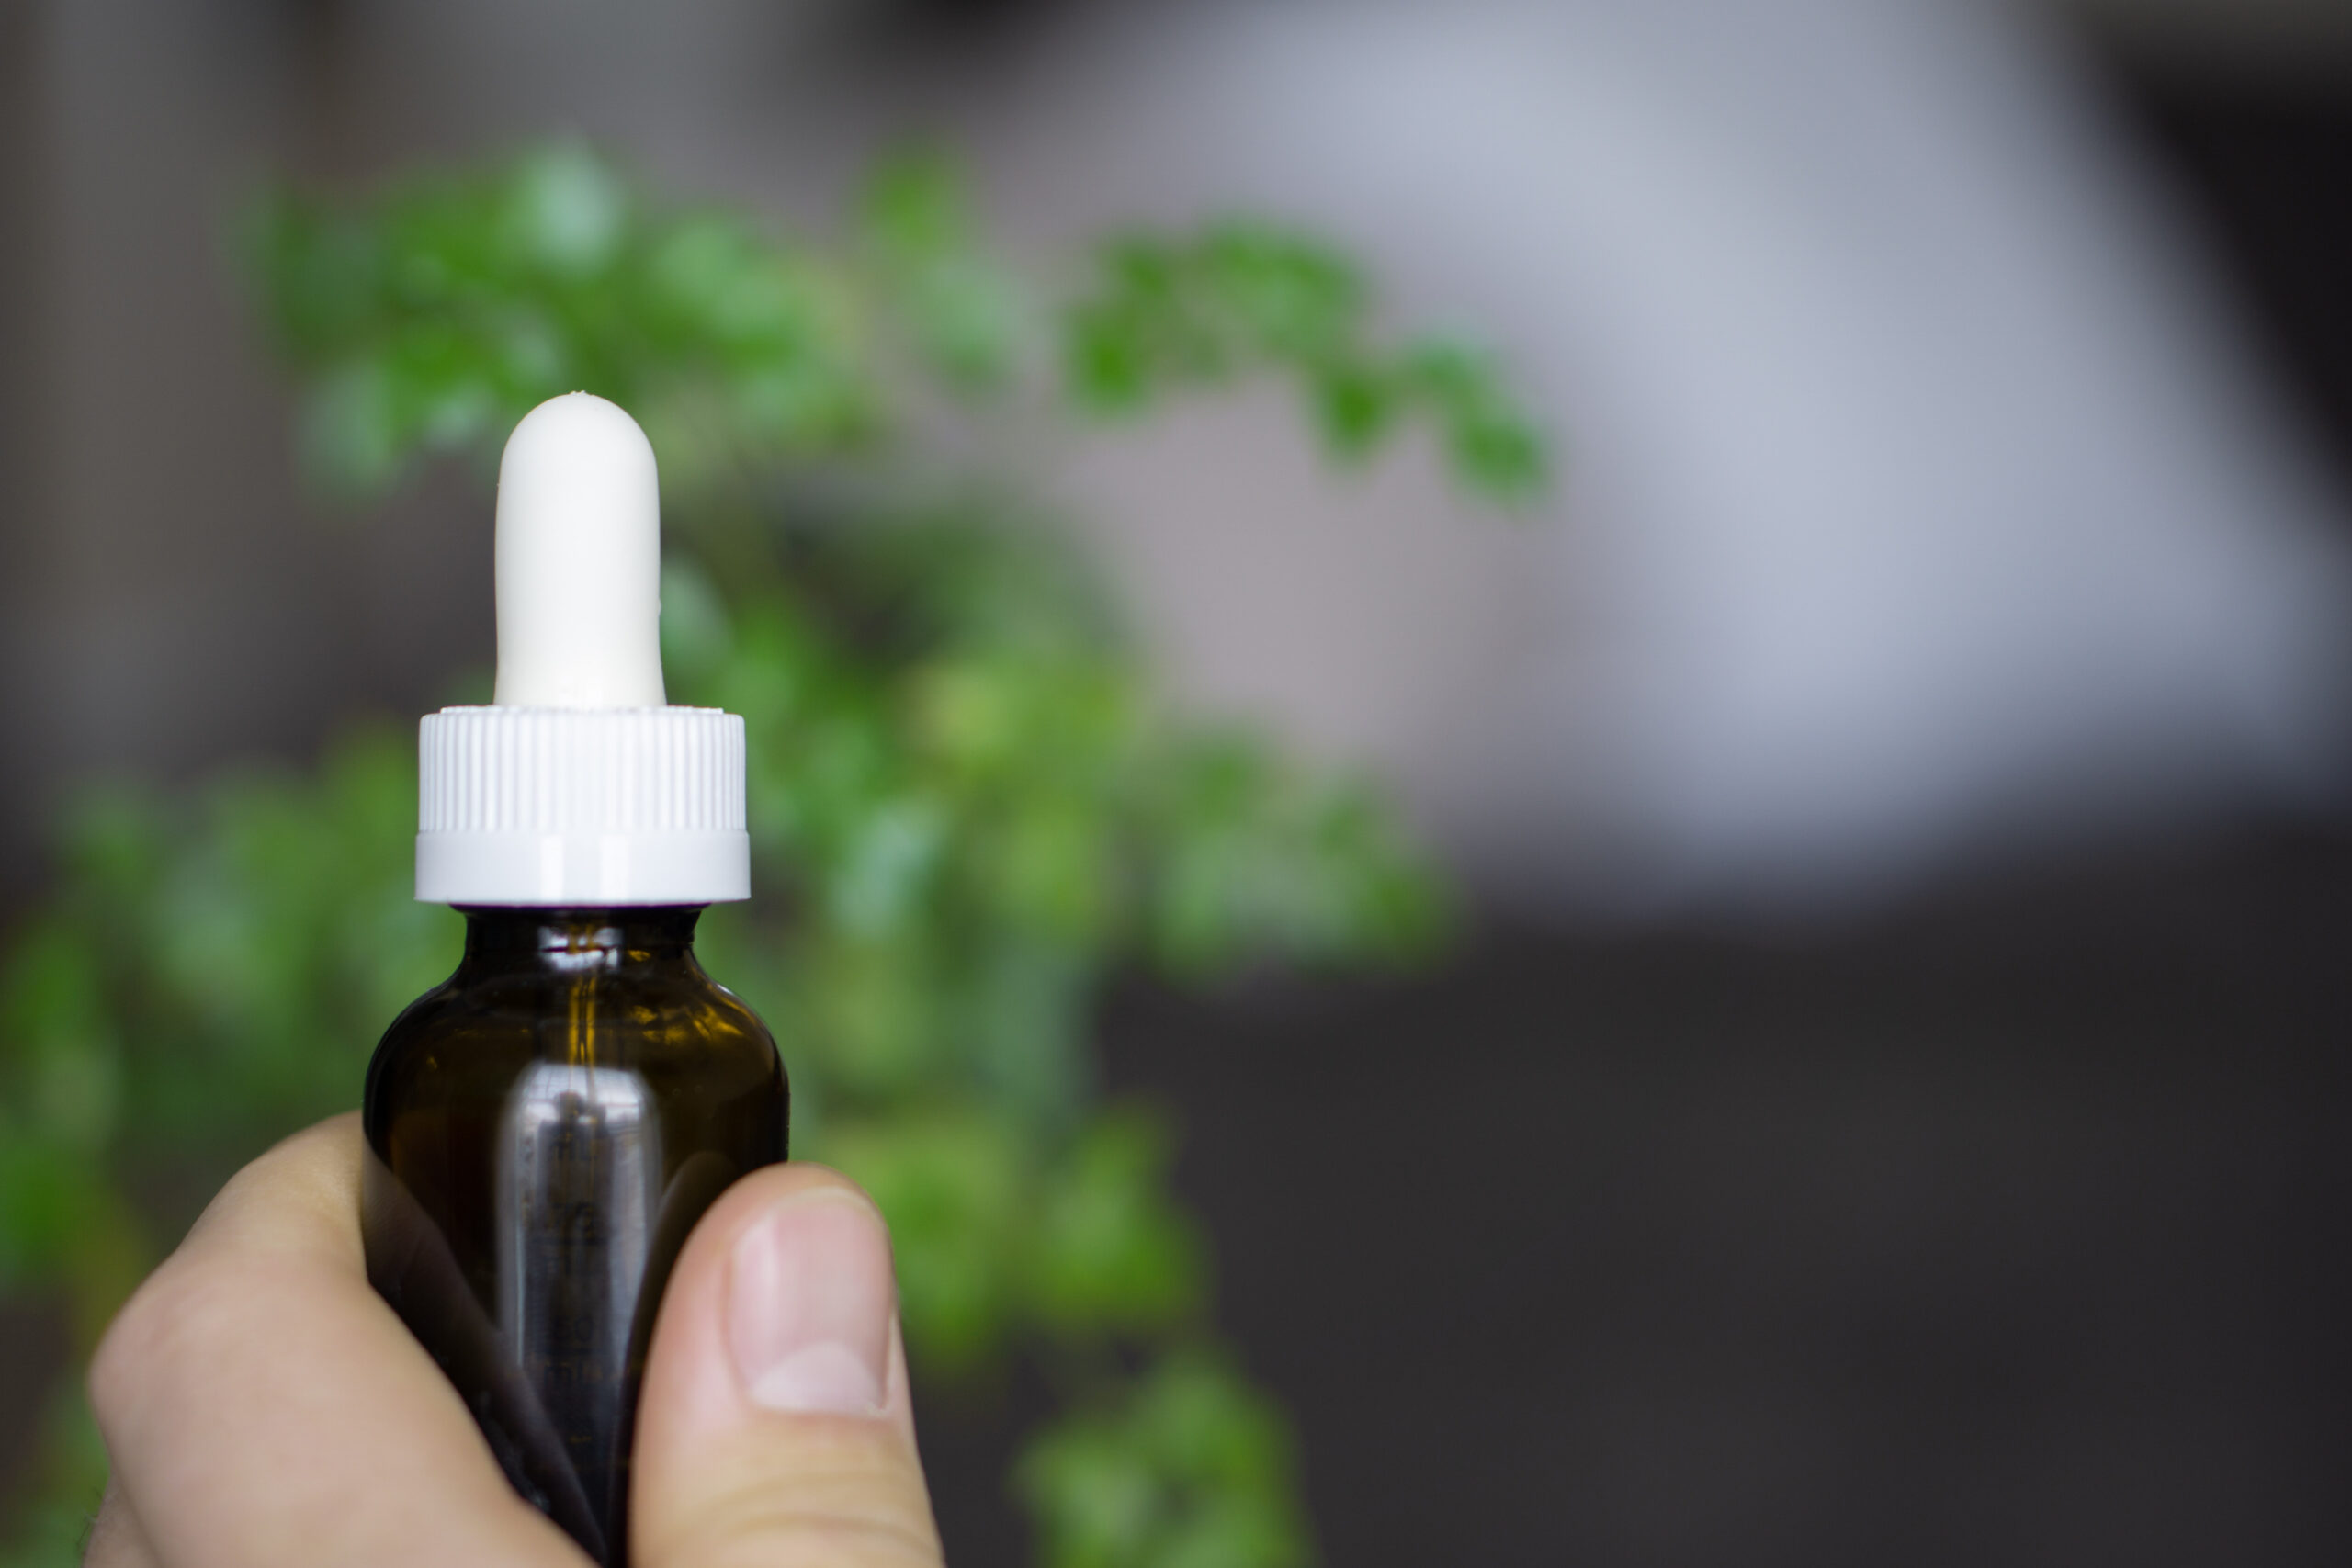 5 Health Benefits Of CBD/THC Oil You Never Knew About